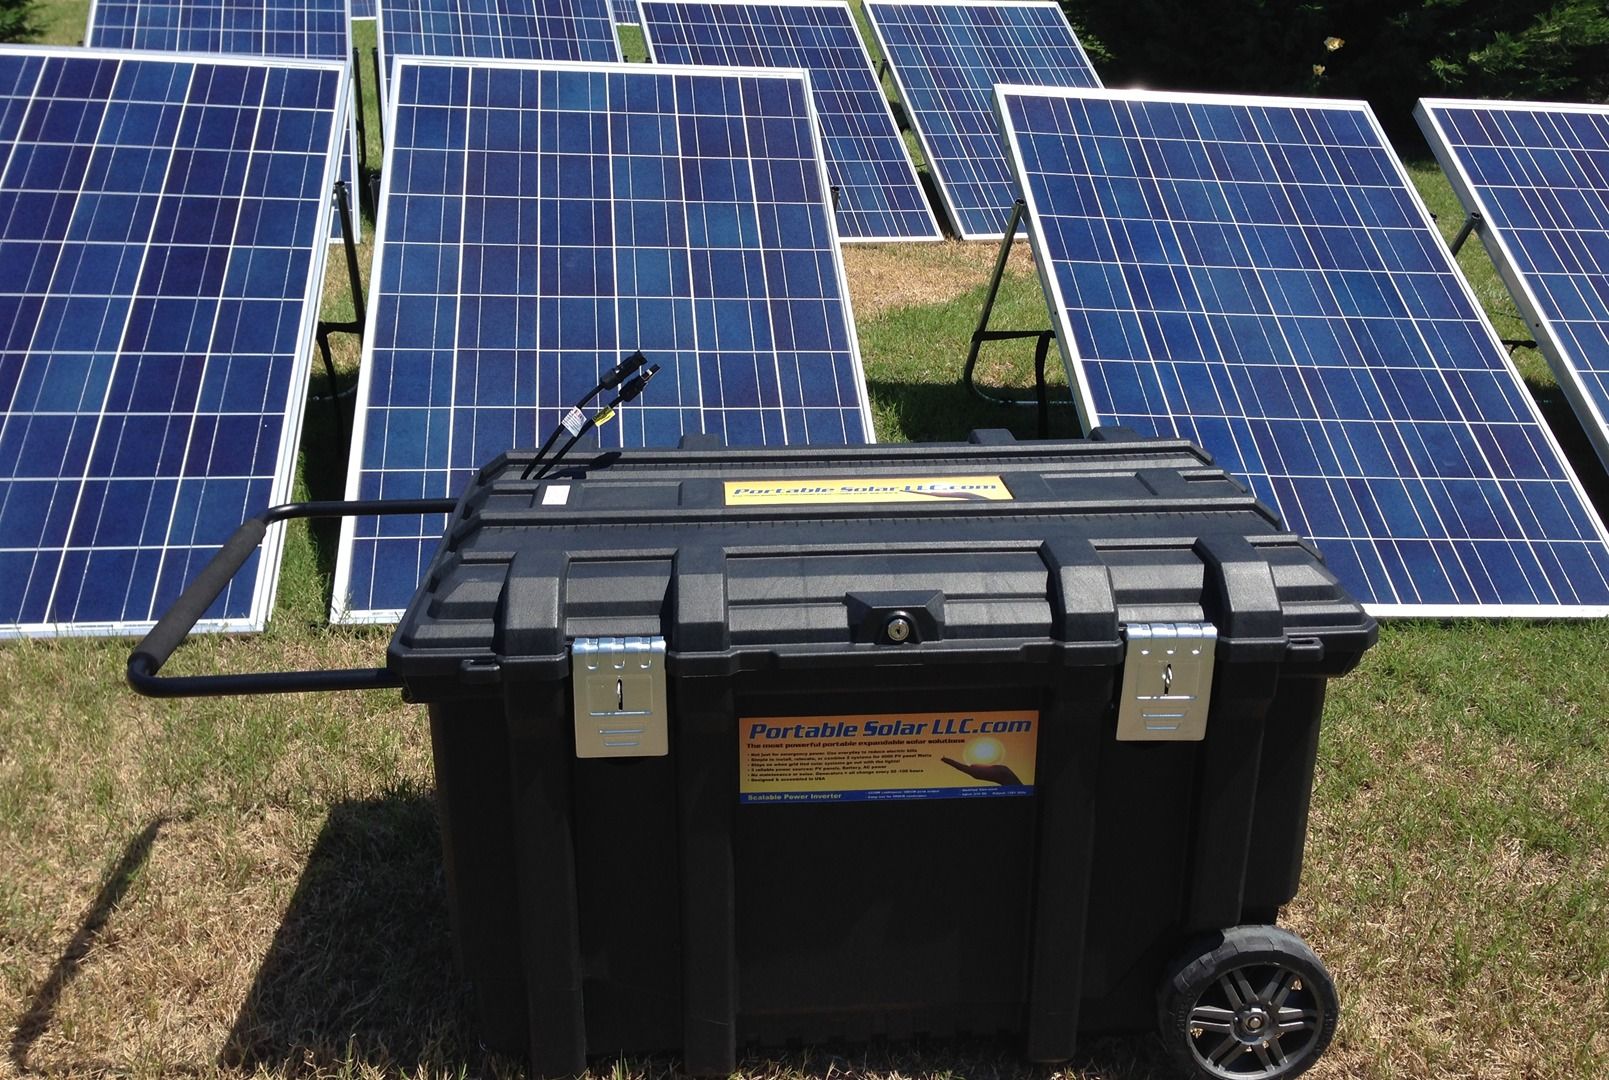 EMP Proof Solar Generator for energy independence